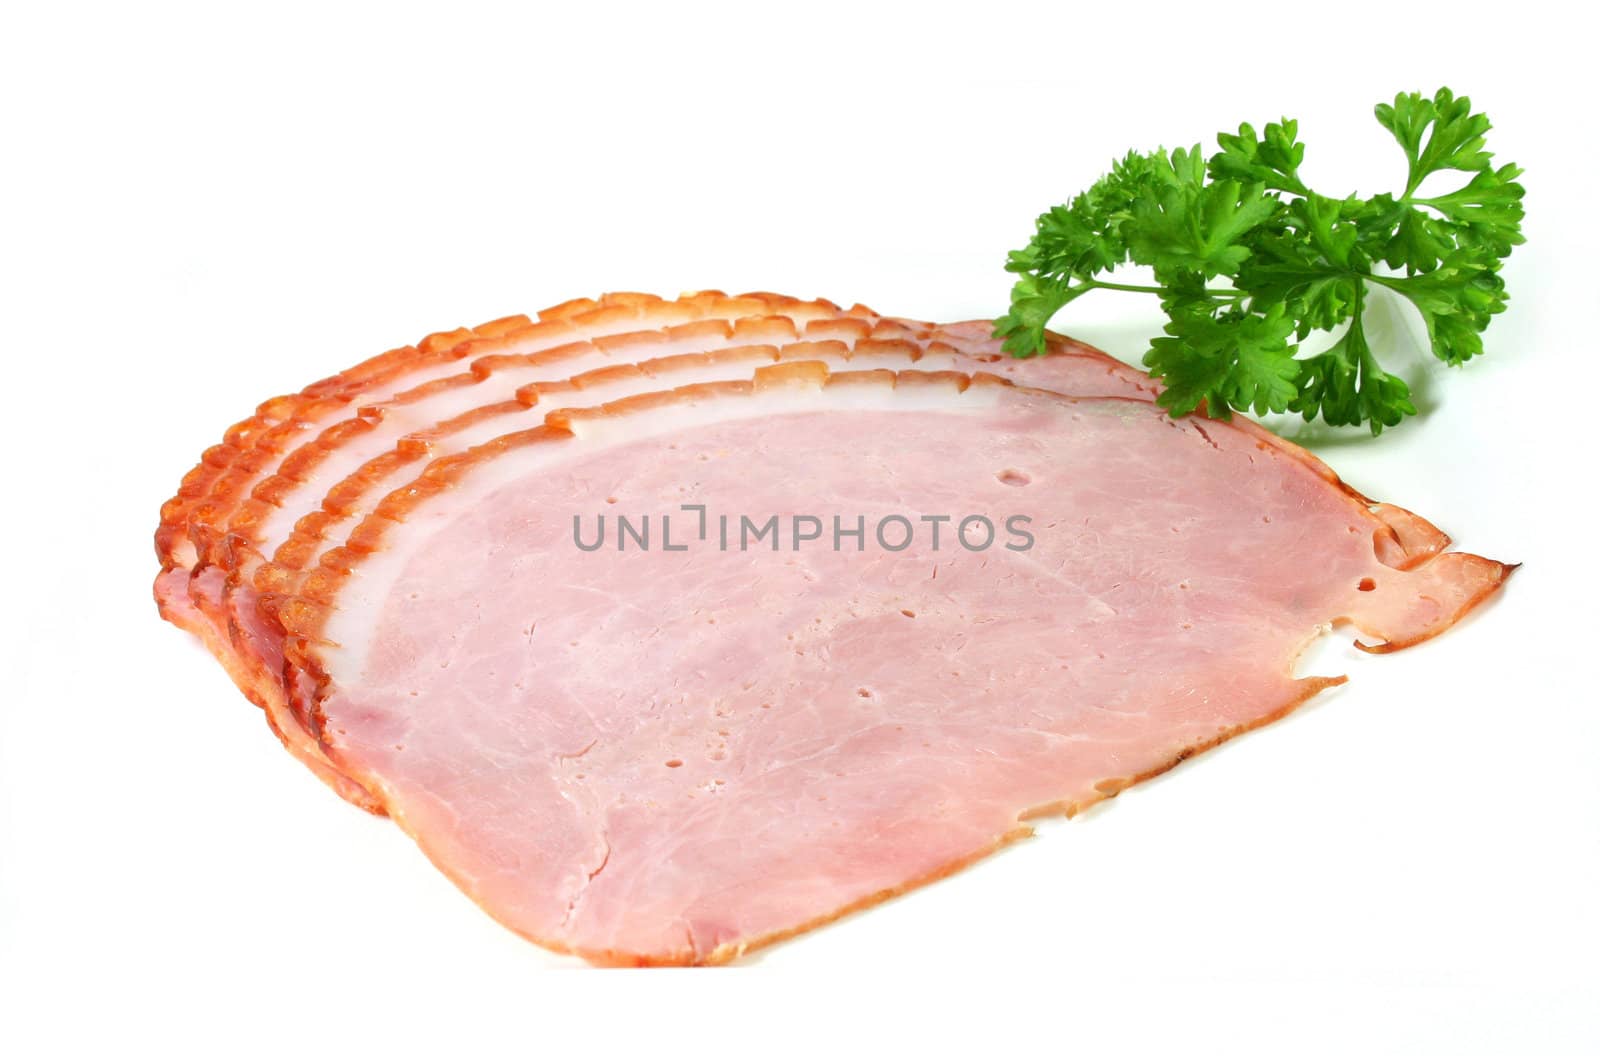 boiled ham with parsley